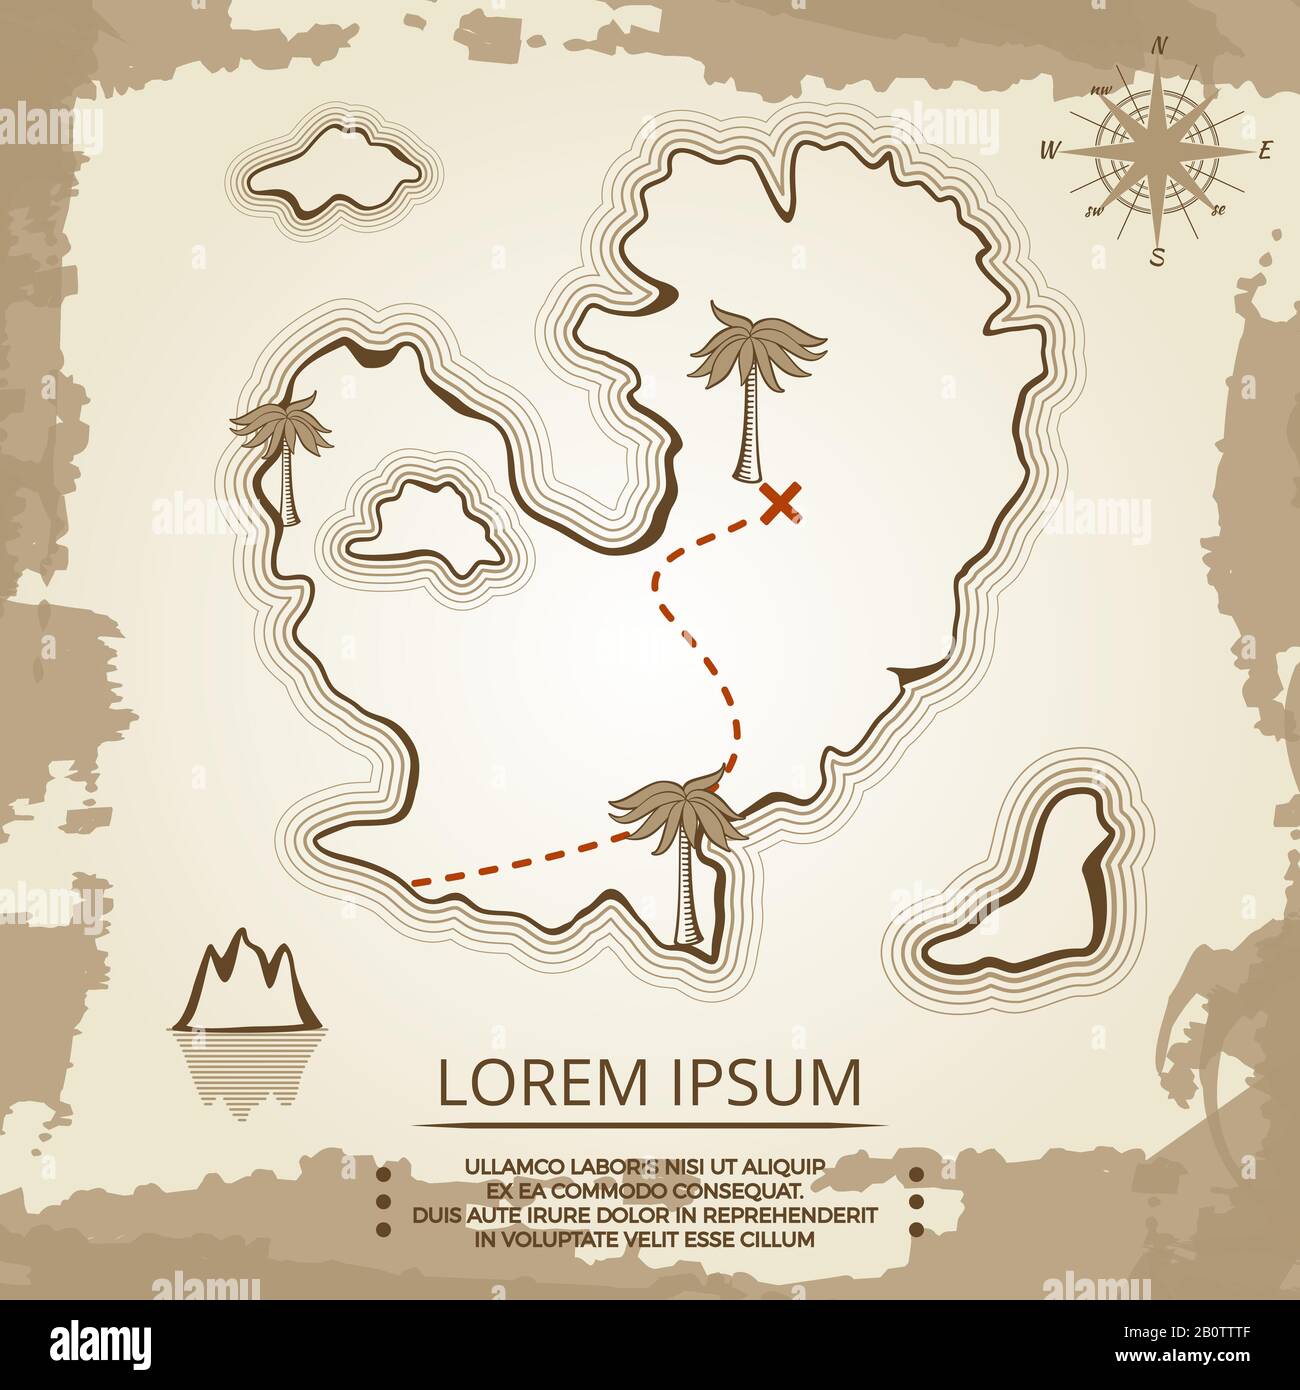 Vintage poster design with map of island. Paper art map island. Vector illustration Stock Vector